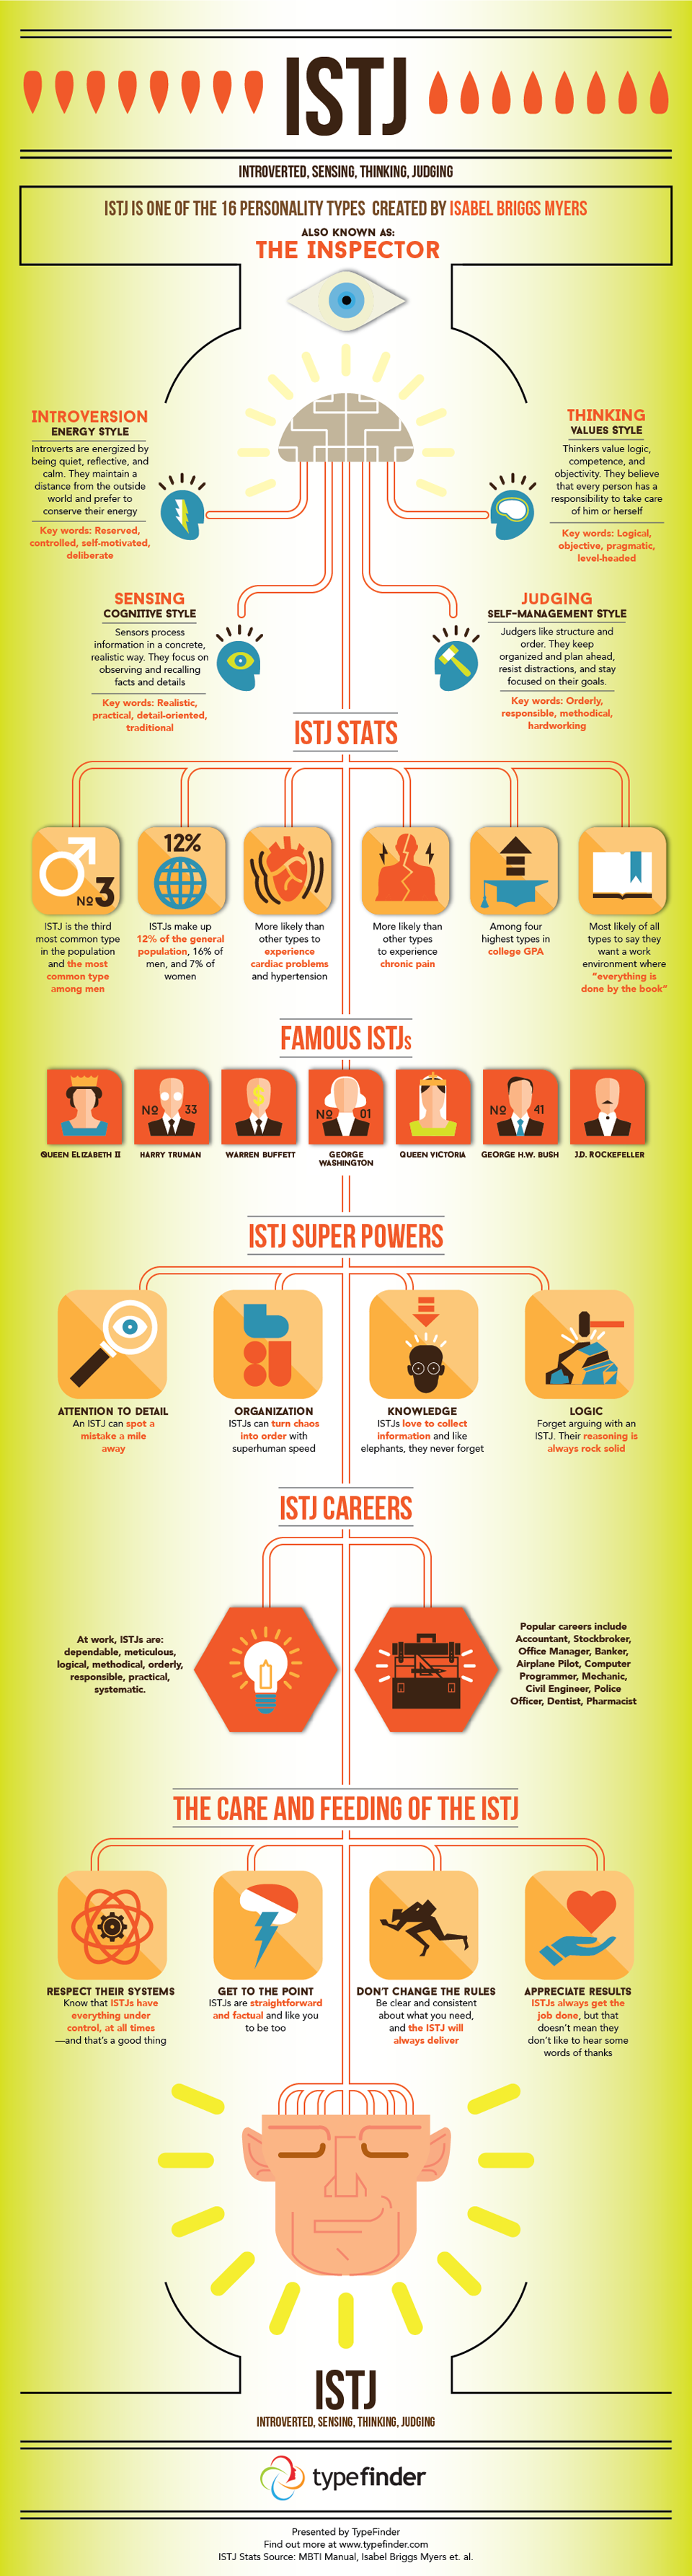 Infographic-All-About-The-ISTJ-Personality-Type Infographic : All About The ISTJ Personality Type